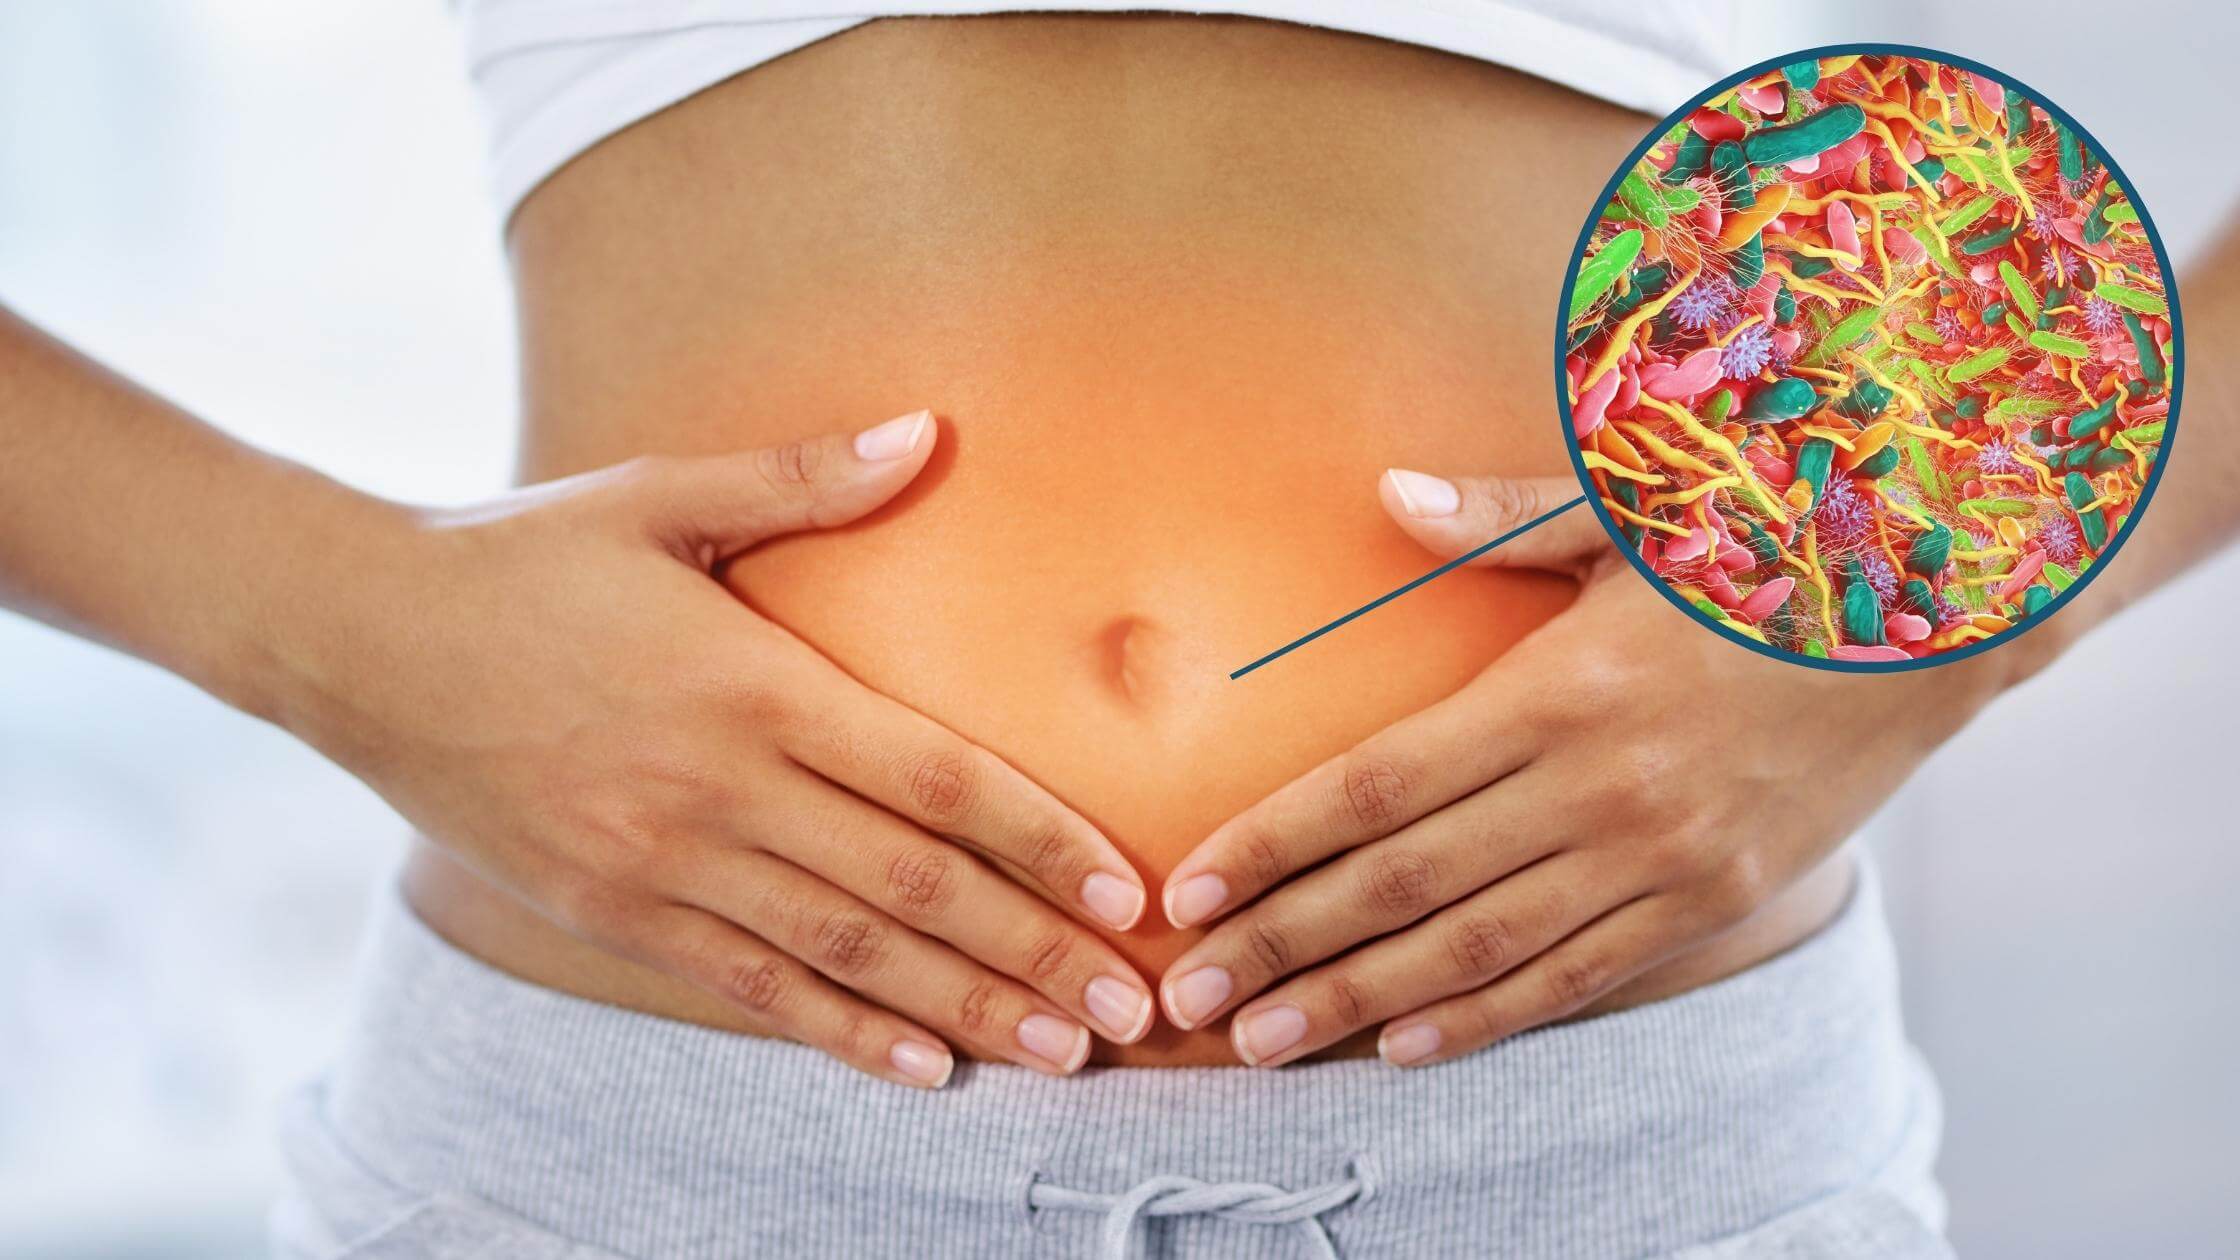 What is a Parasite Cleanse? And Why are They Getting So Popular on Social Media?